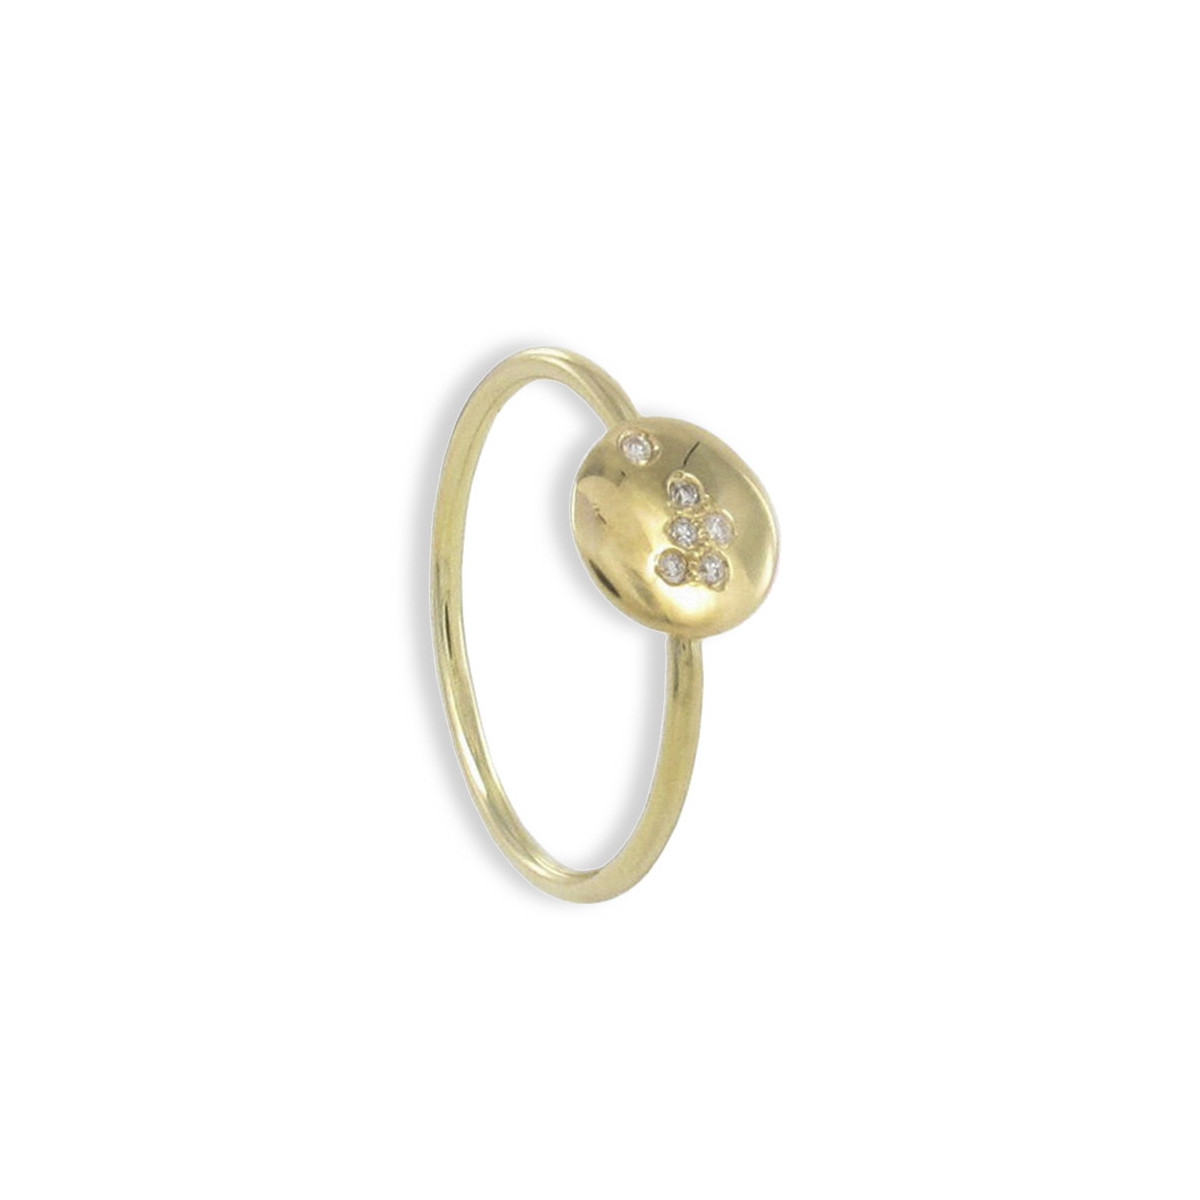 GOLD AND DIAMONDS YOUTH RING